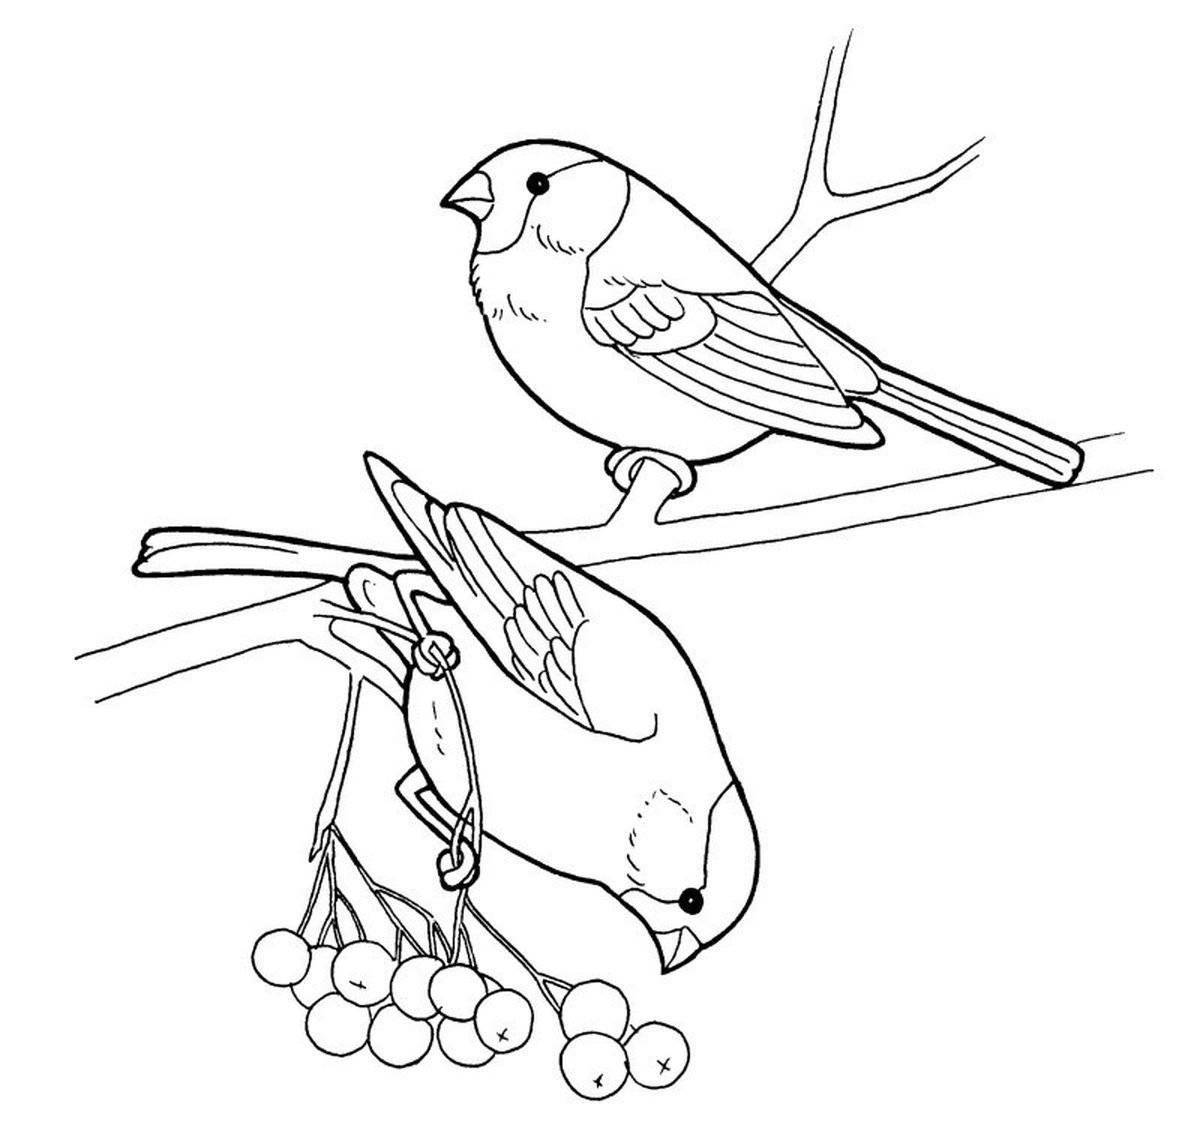 Shining Tit Day coloring page